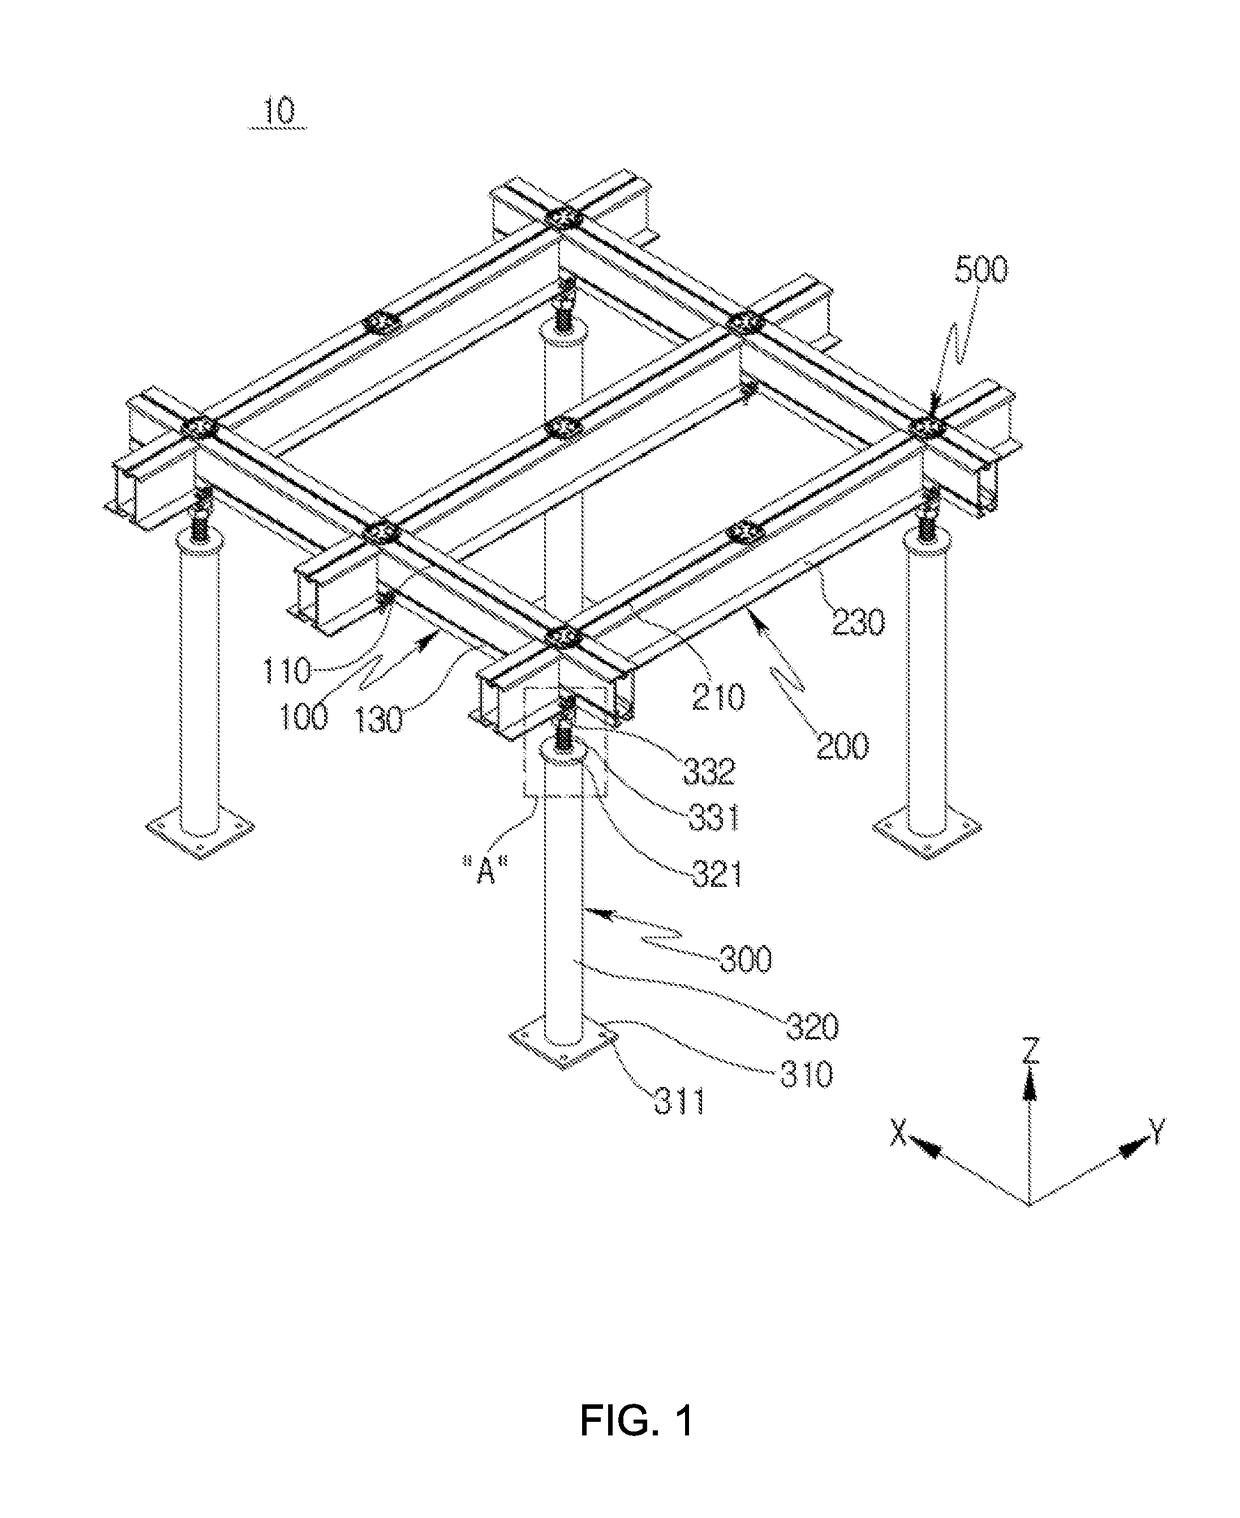 Structure for supporting access floor panel